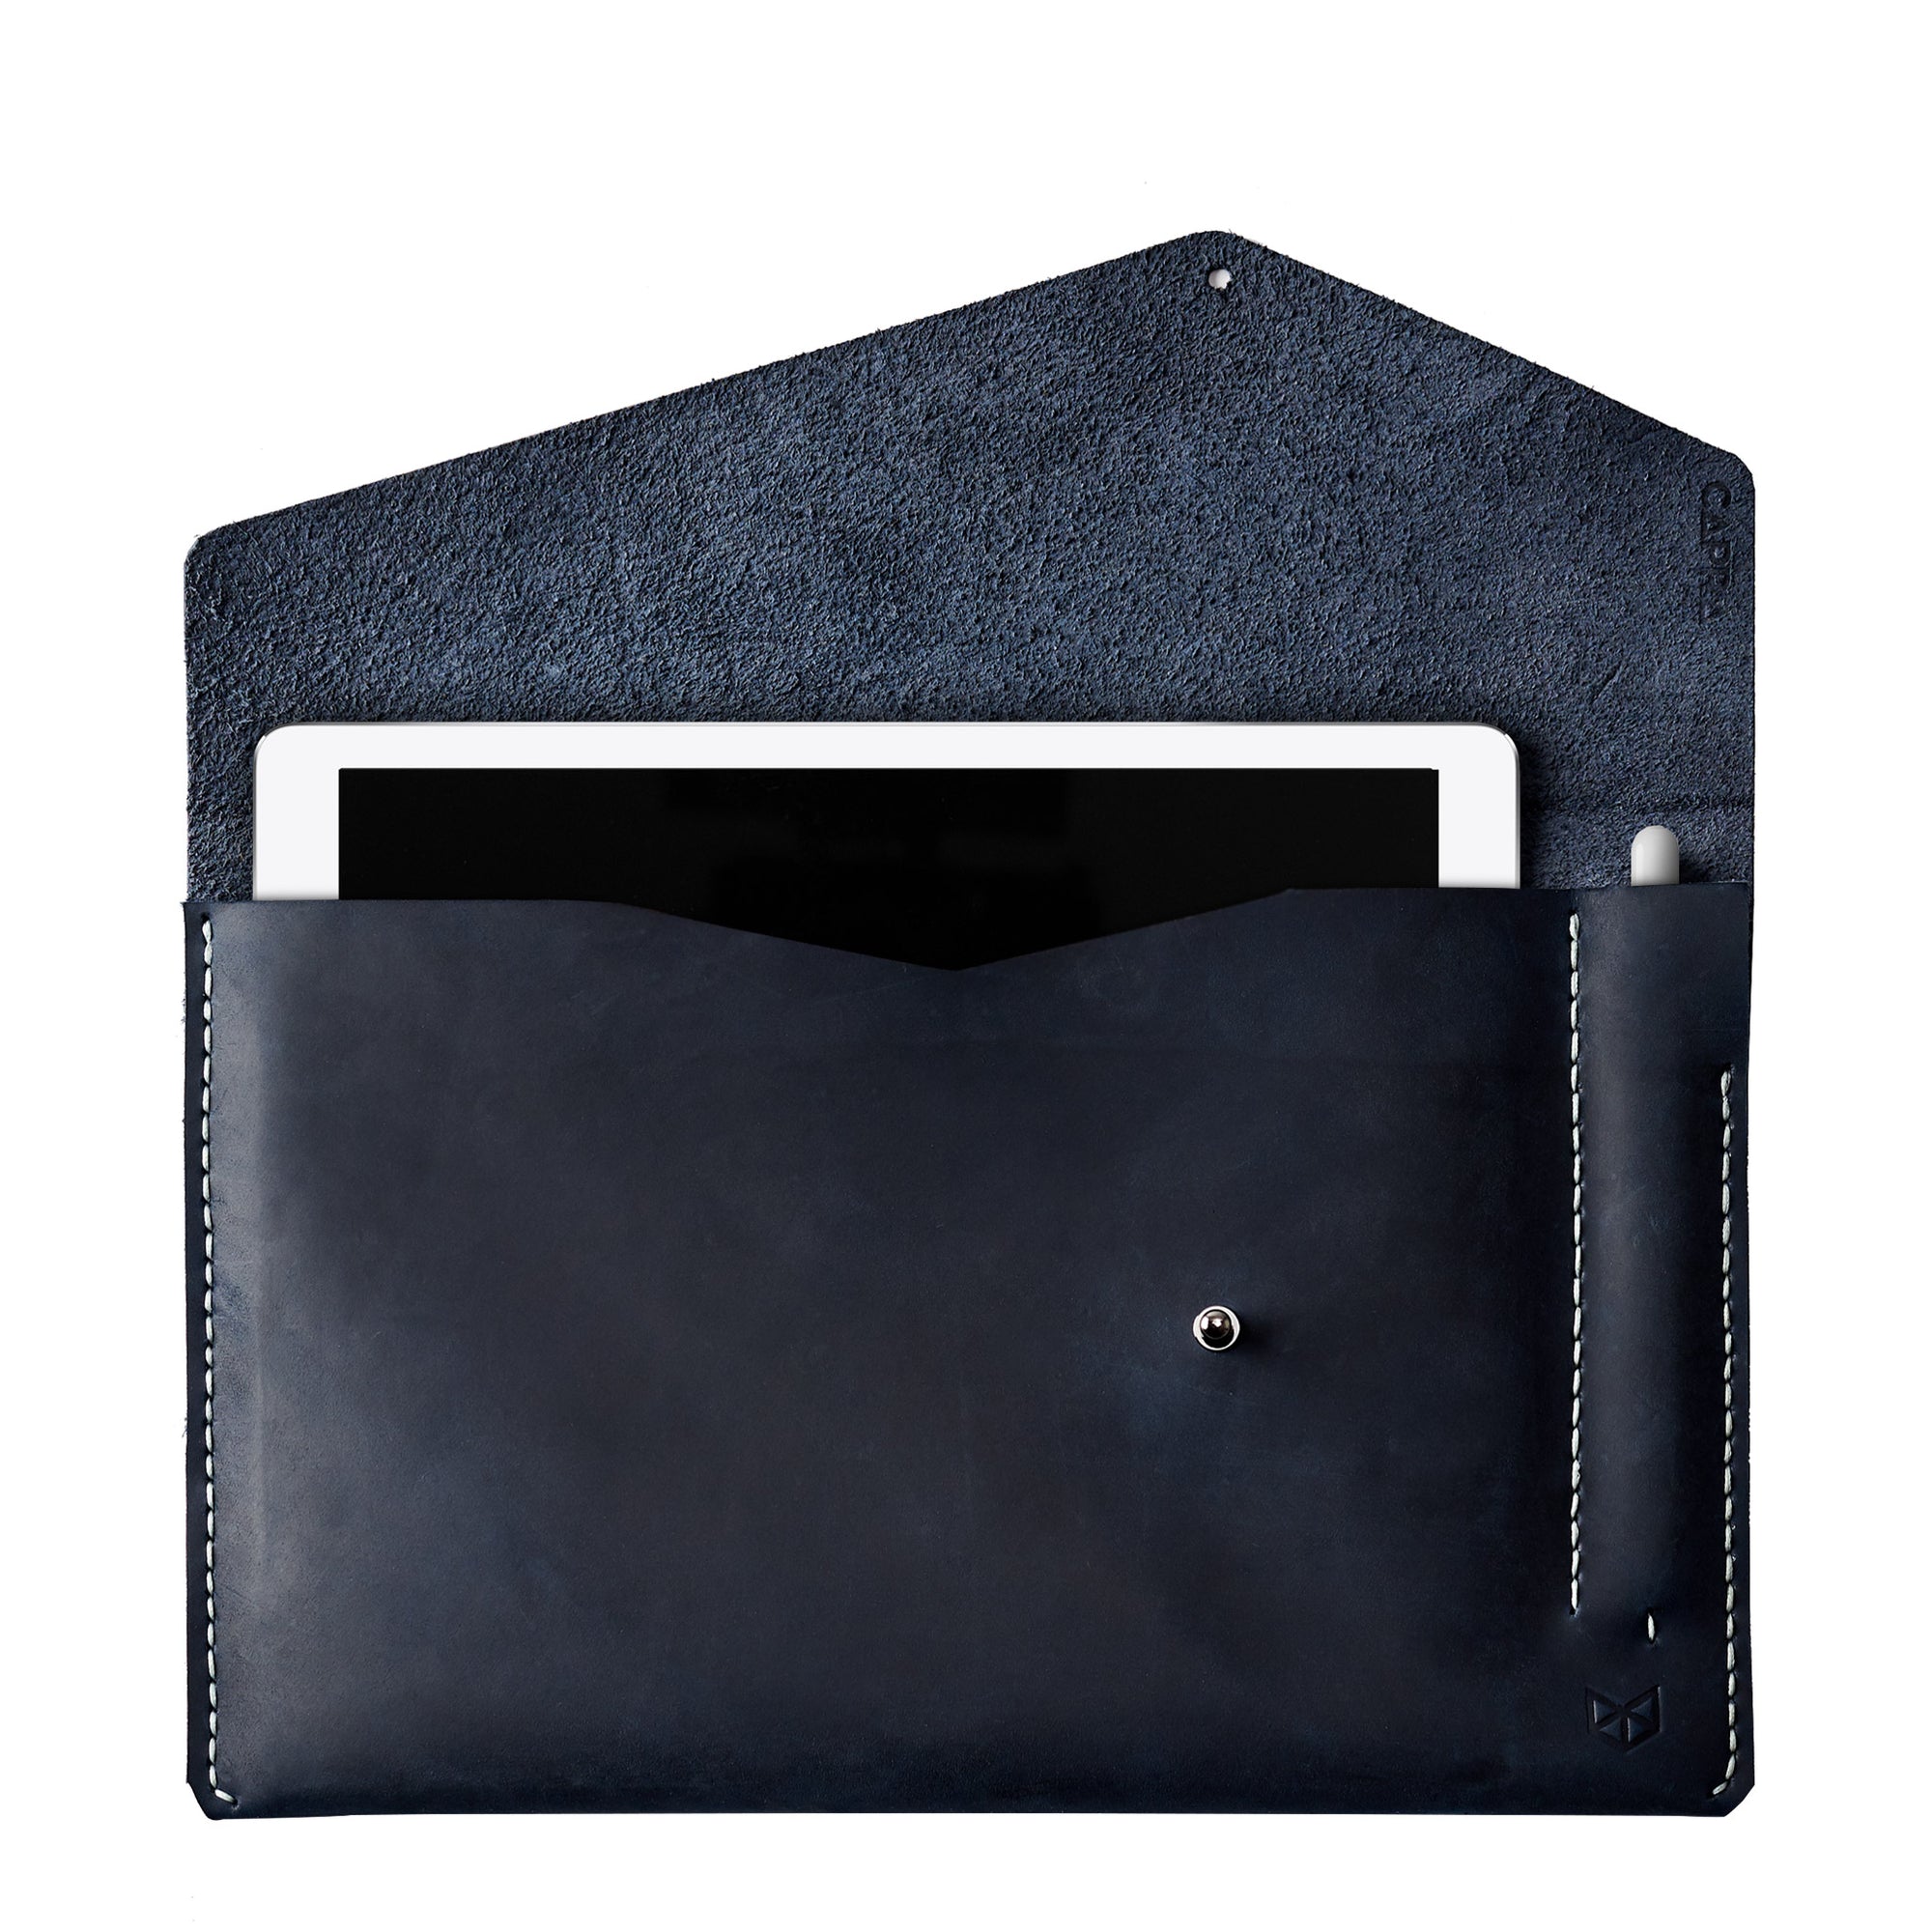 Blue leather sleeve for Pixel Slate. Mens gifts